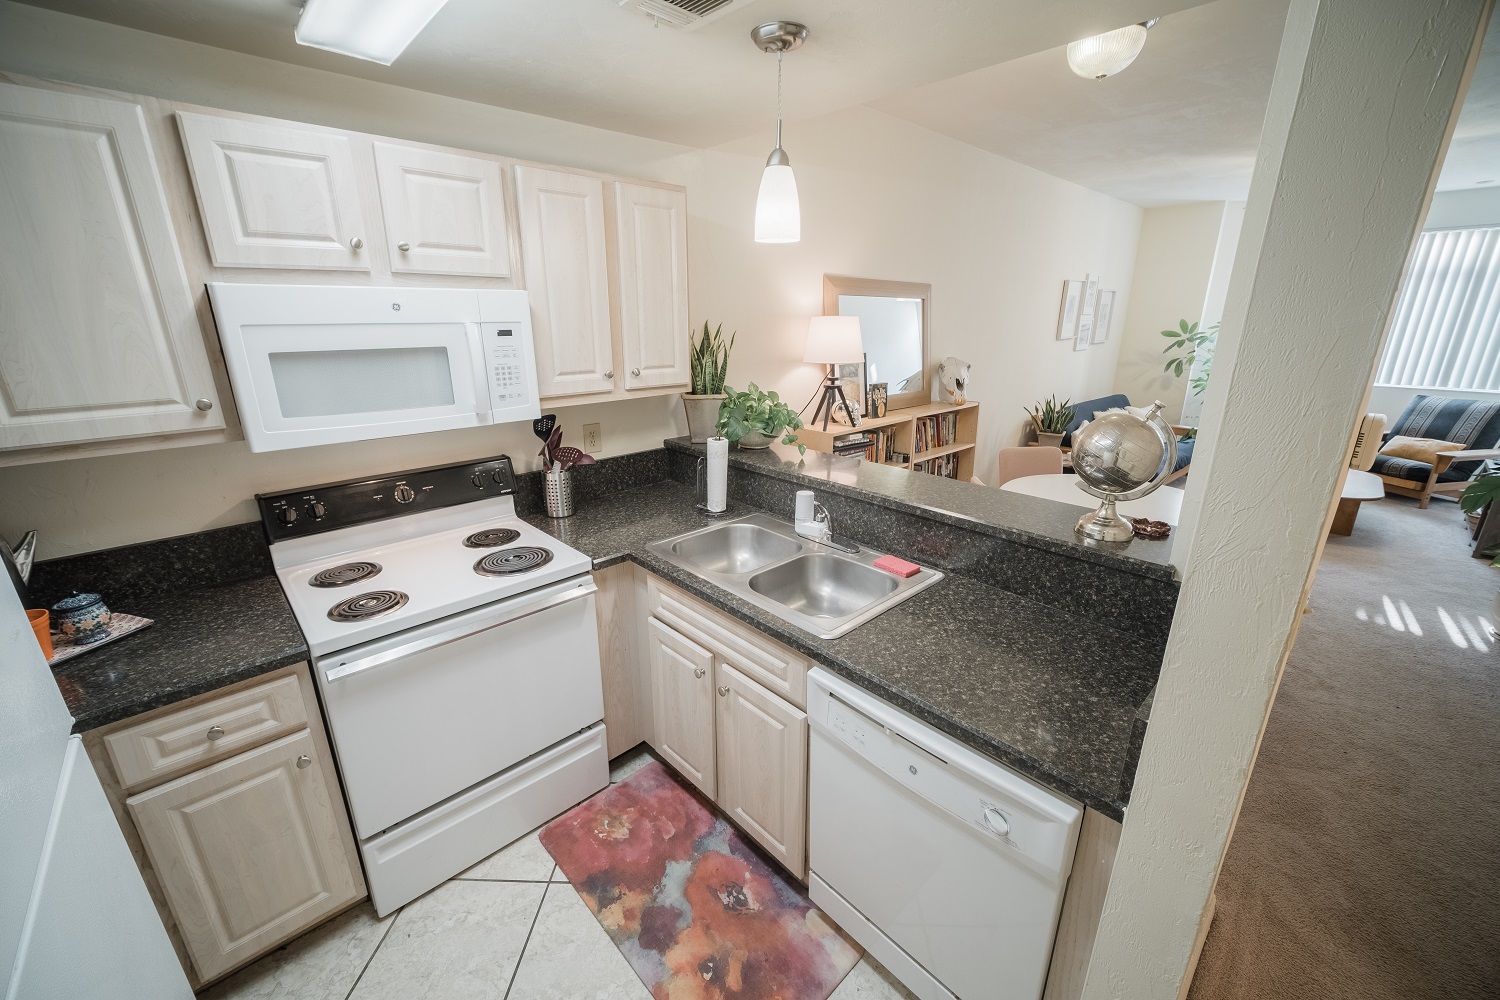 This floorplan has been upgraded with oversized tile floors, granite style countertops, soft-touch drawers, new cabinetry, appliances, fixtures and more!